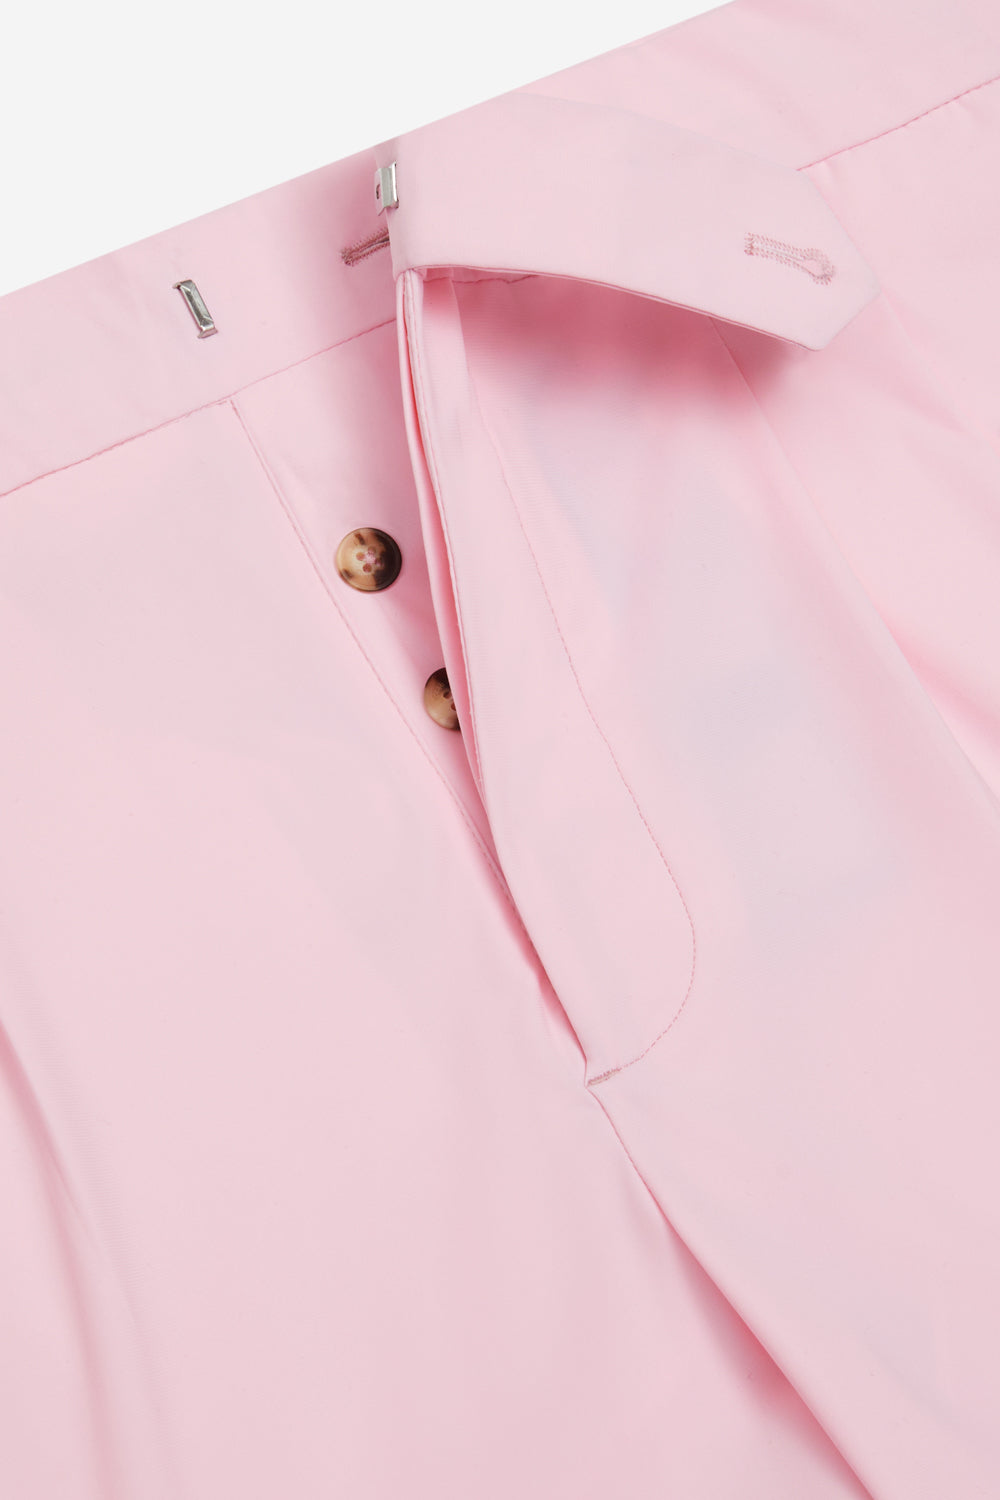 PINK LOSSI TROUSERS